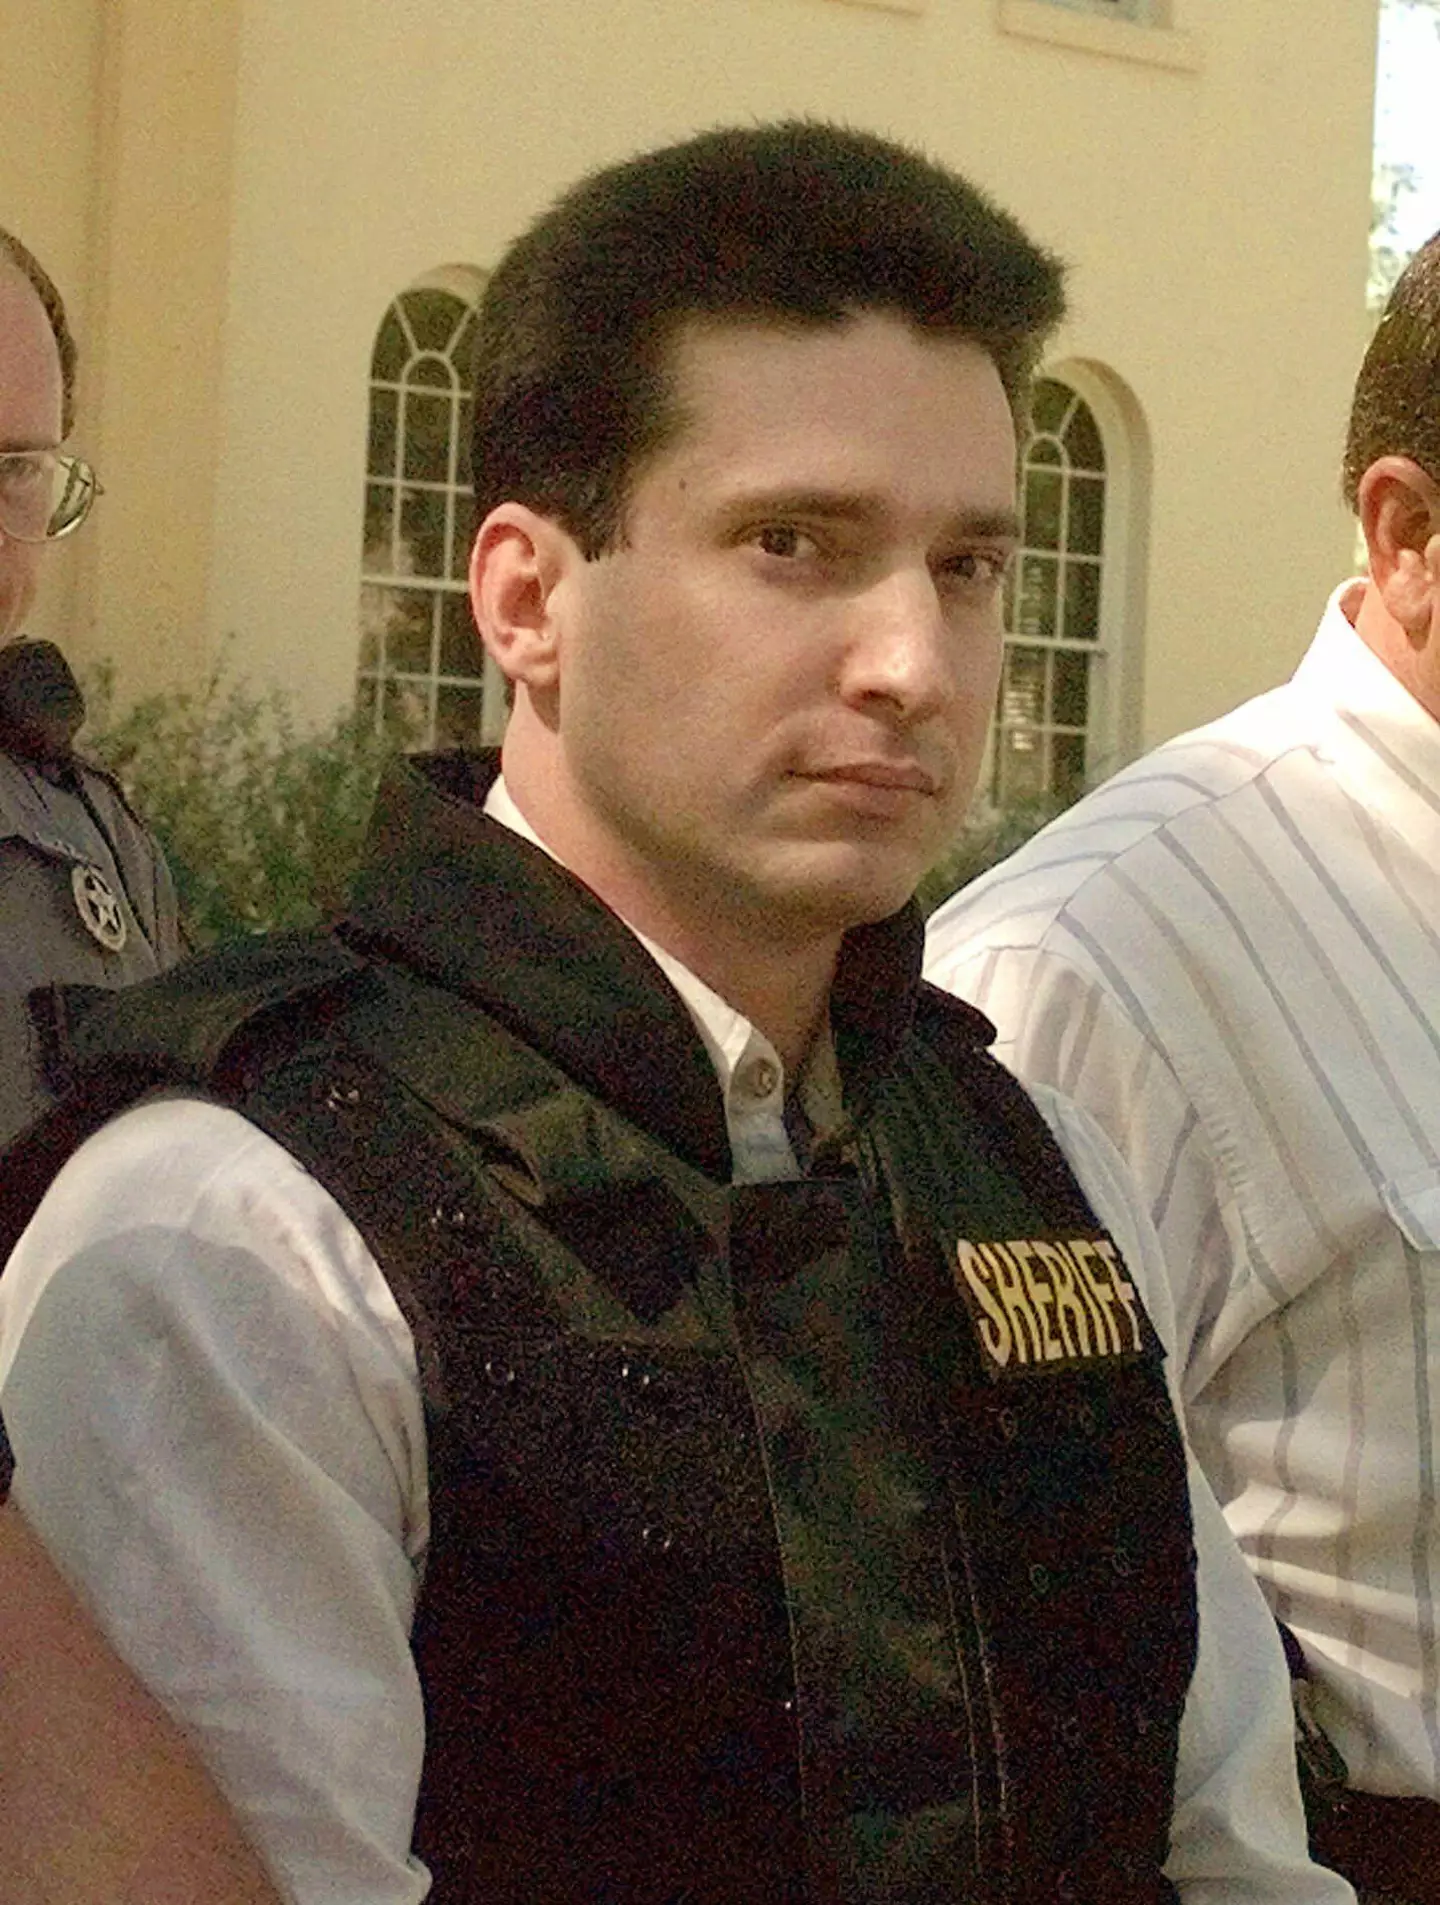 Brewer was arrested along with his three accomplices for the murder of James Byrd Jr.